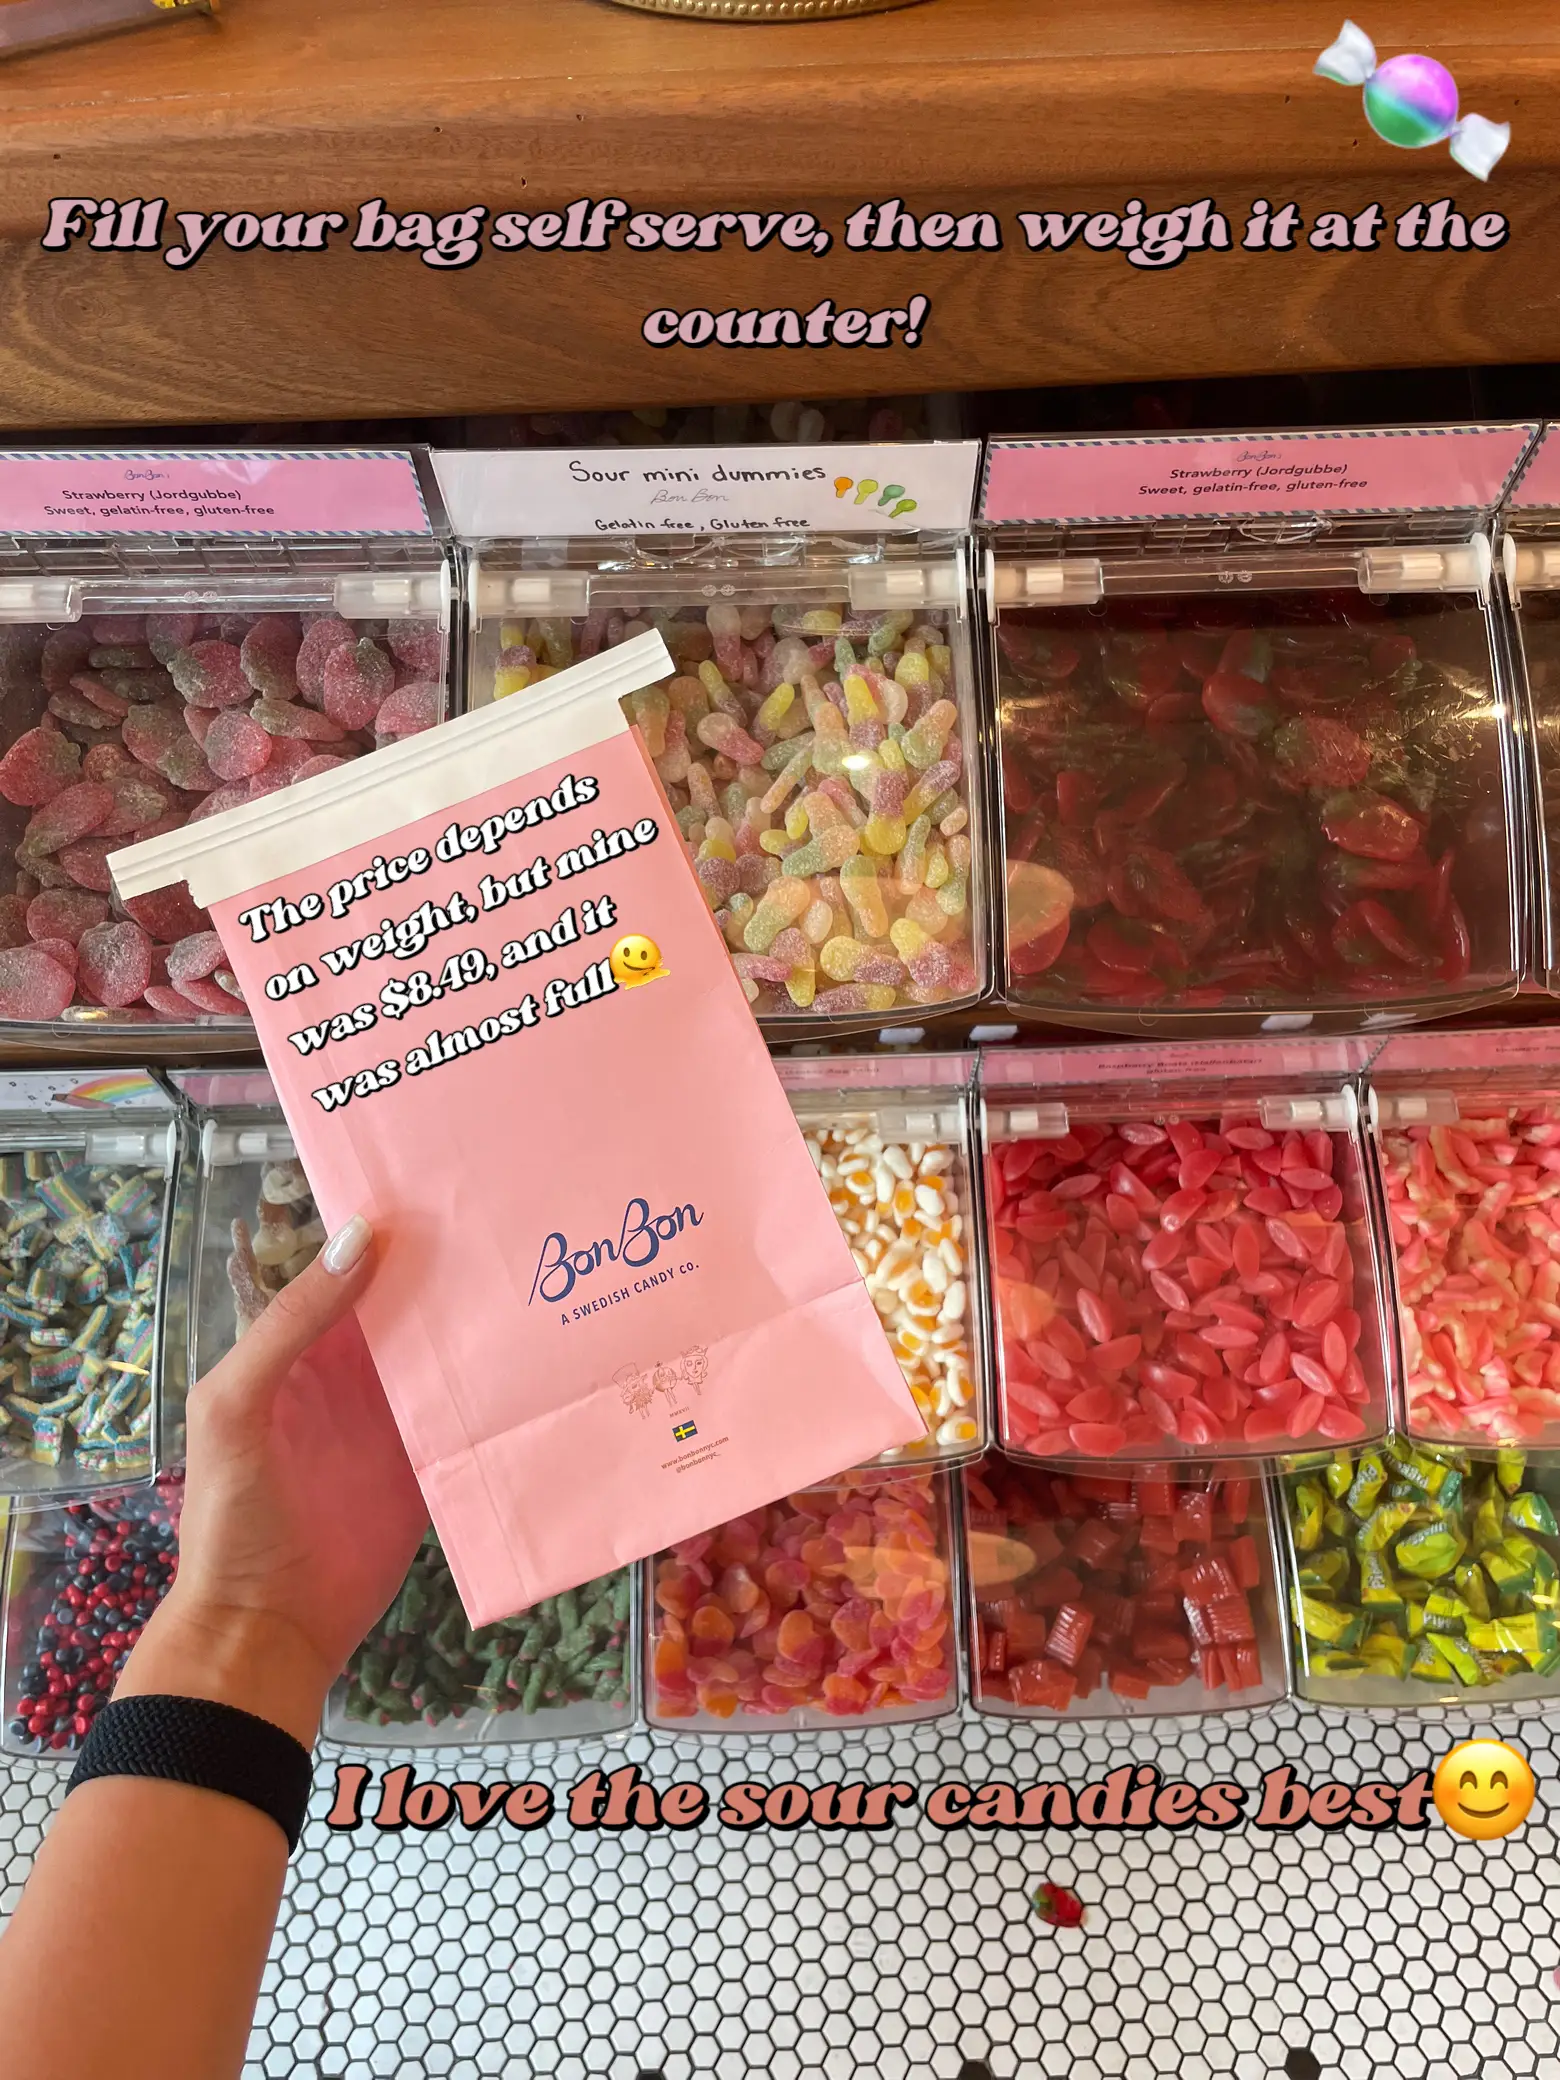 Niende tildeling filosof Authentic Swedish Candy Store in NYC 💋🍬🍭 | Gallery posted by Jace |  Lemon8